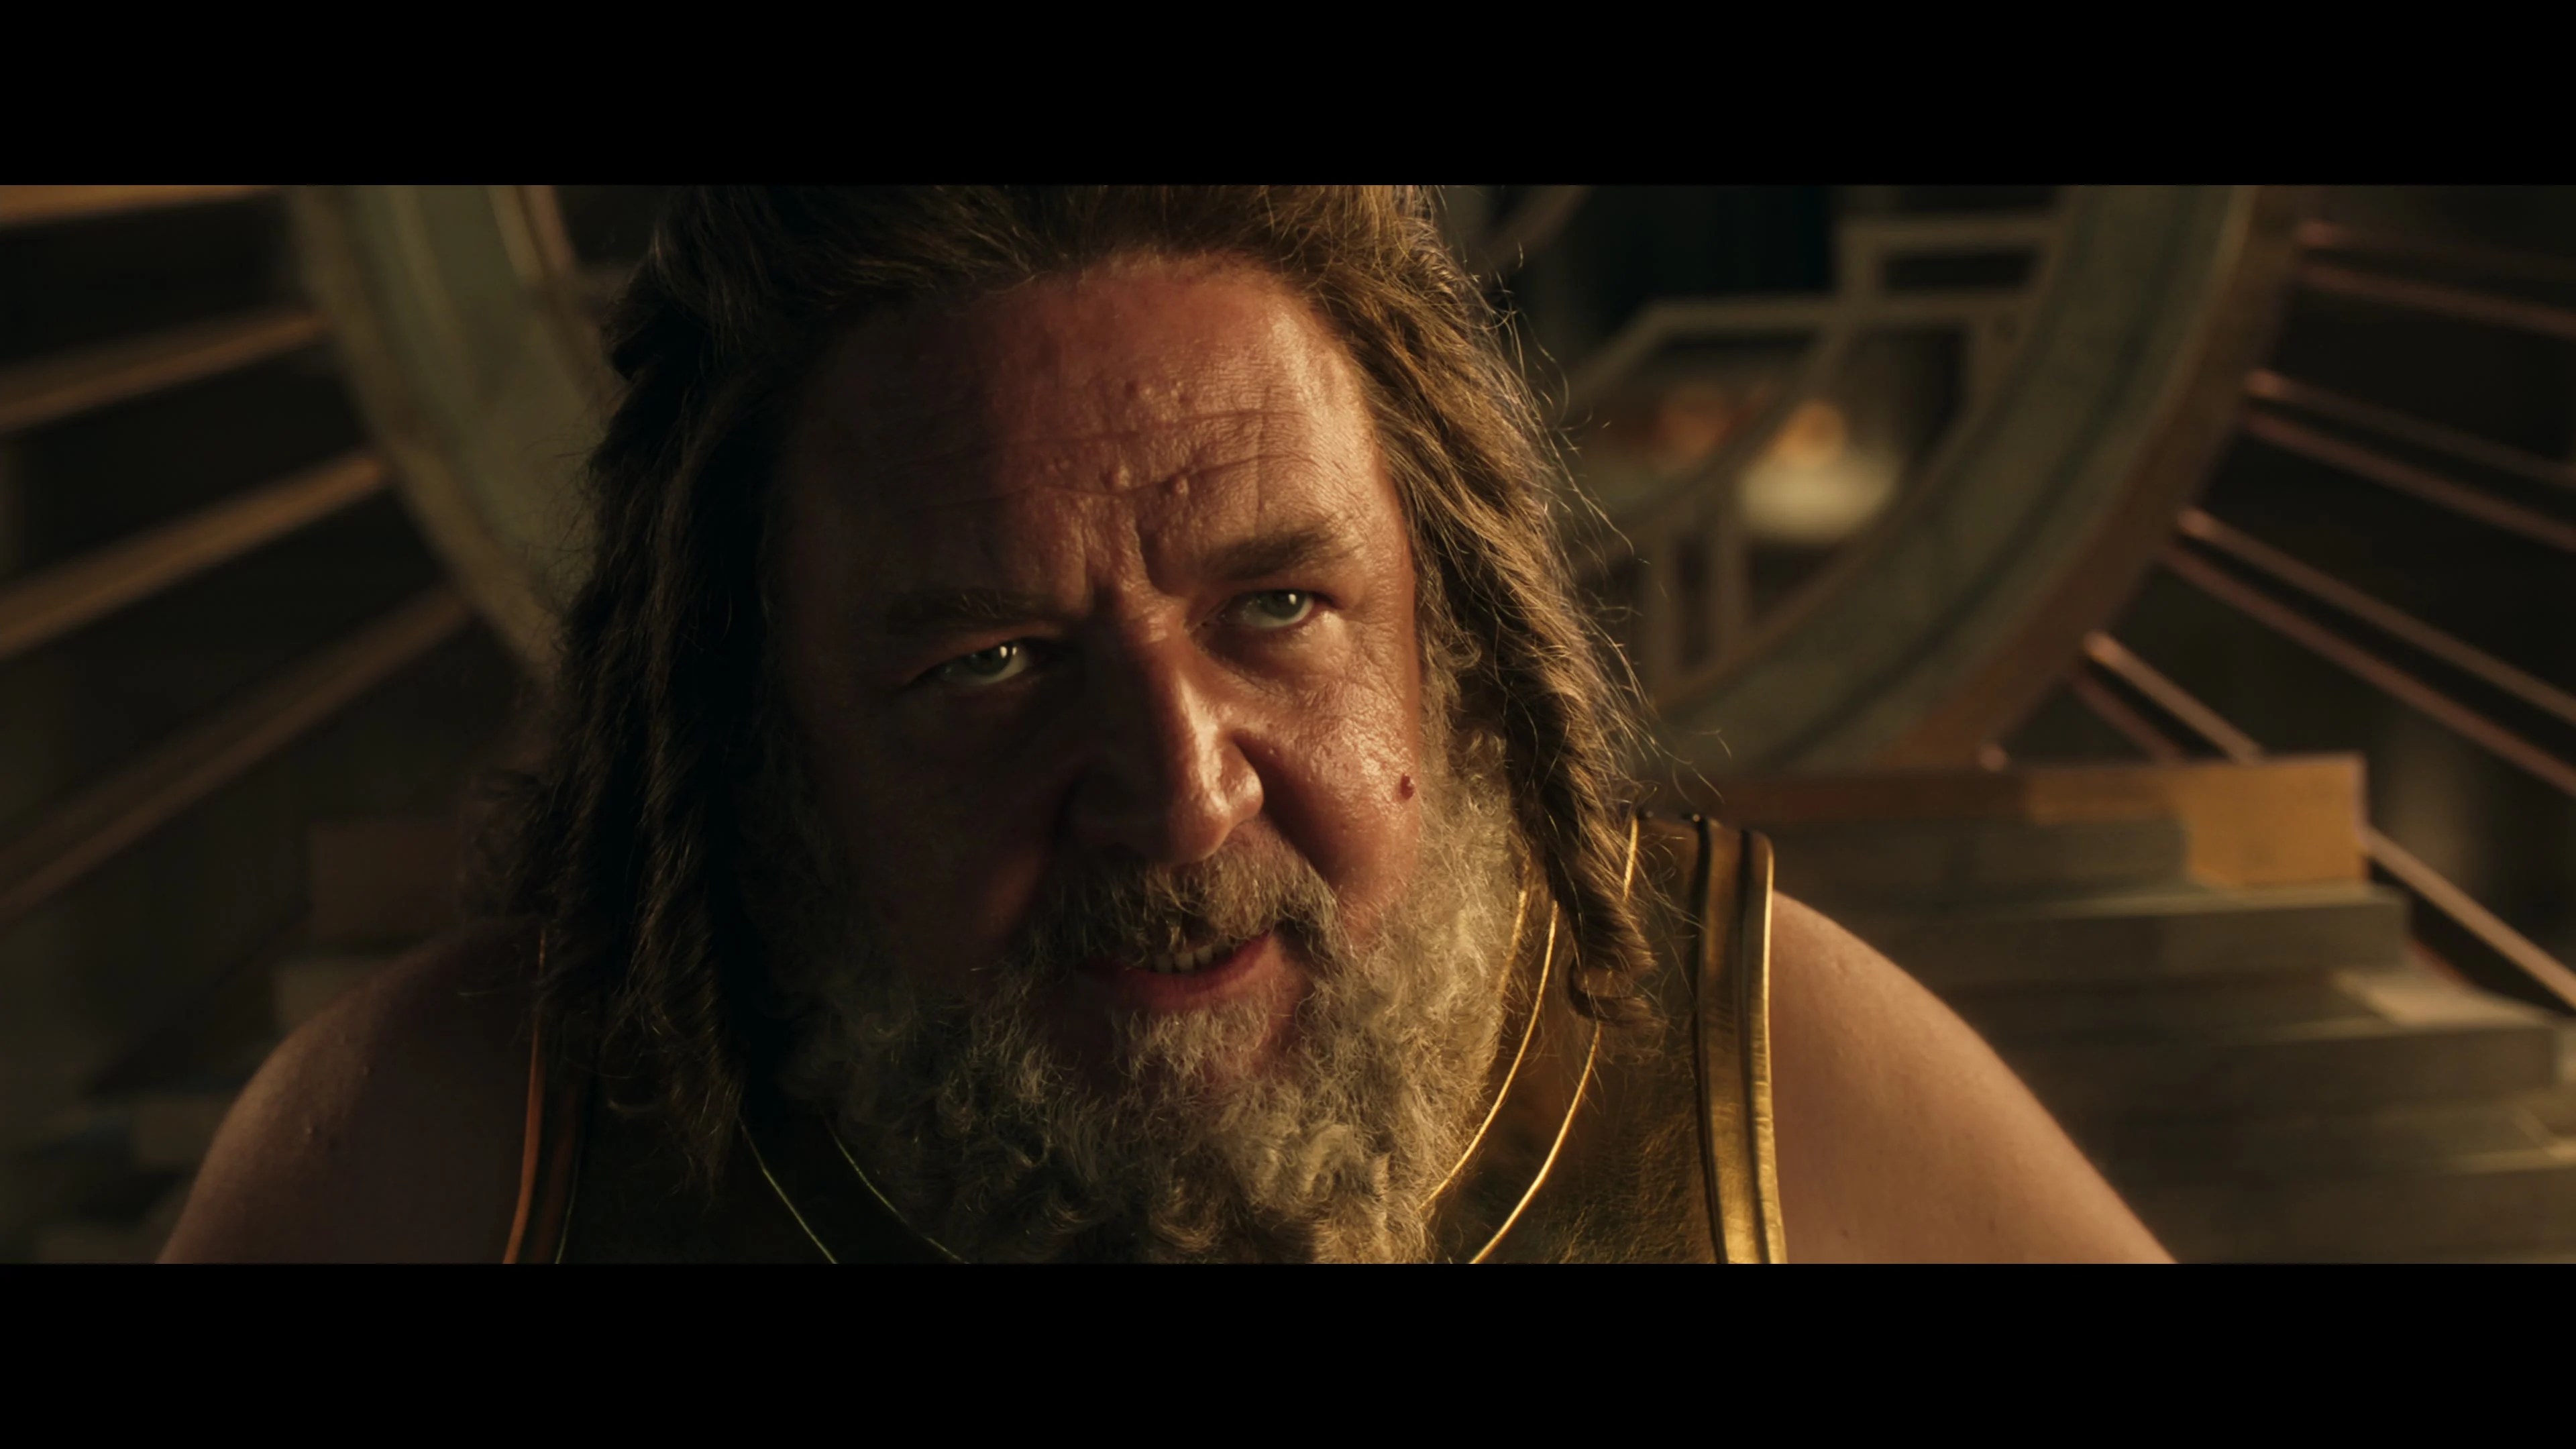 ‘Thor: Love And Thunder’ Star Russell Crowe Criticizes Actors Who Complain About Appearing In Super Hero Movies: “You’re Telling Me You Signed Up For A Marvel Movie And You Didn’t Get Enough Pathos?”